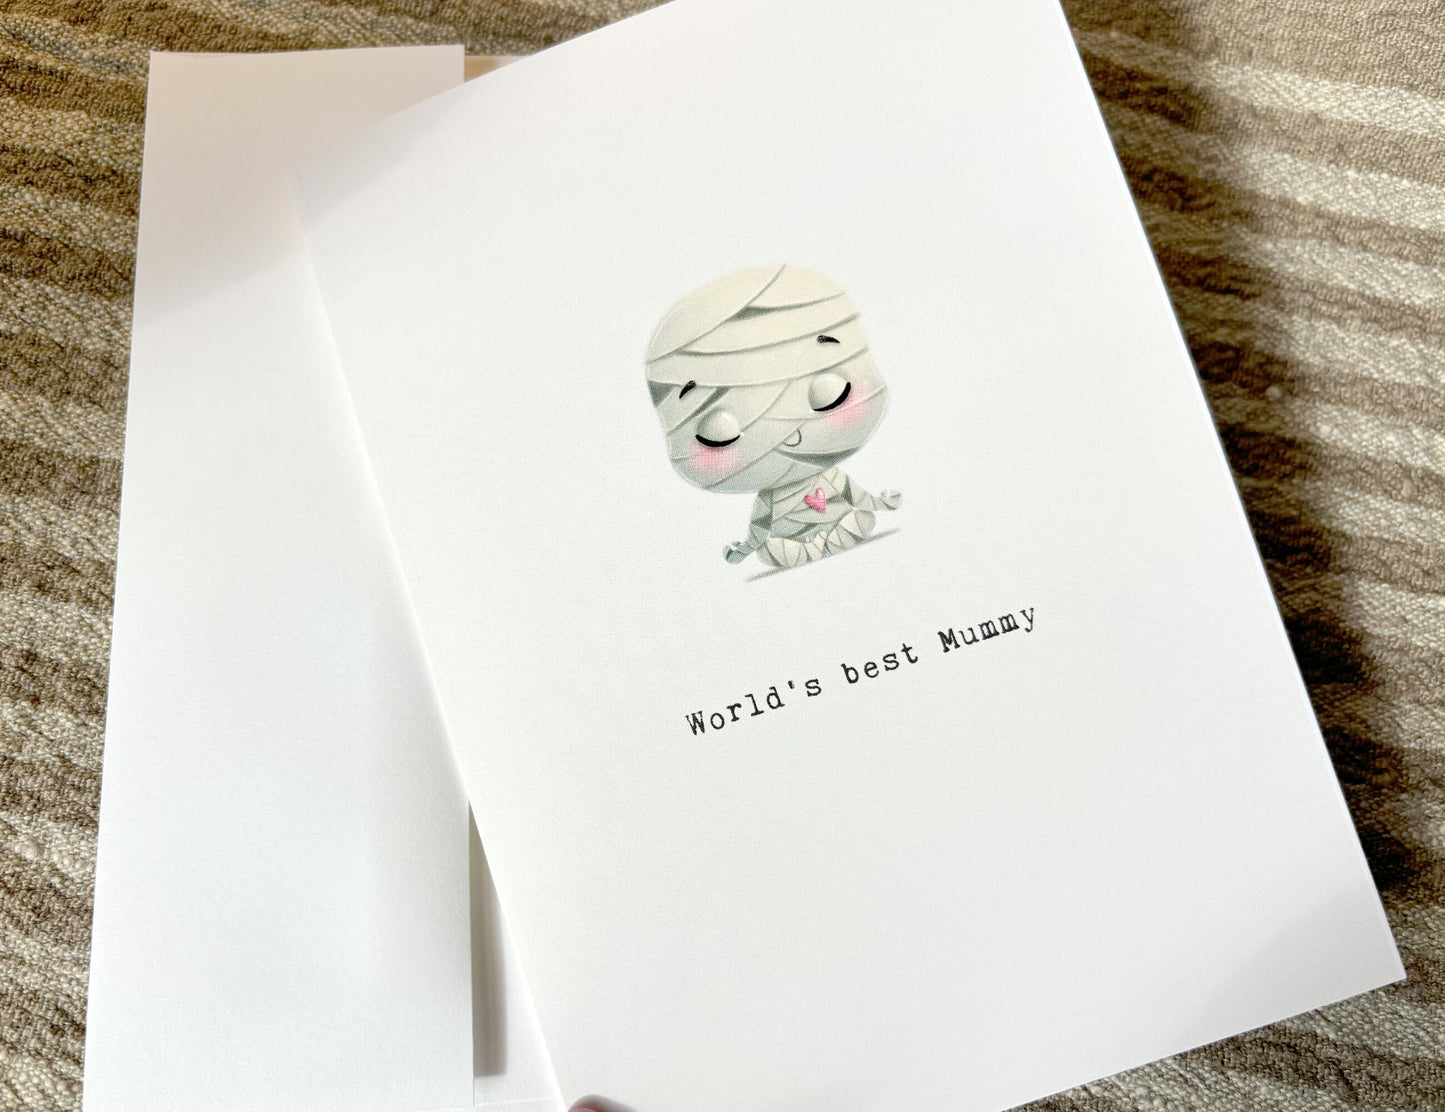 Mmother's day card with an illustration of a cute mummy and it say's "world's best mummy" on the outside